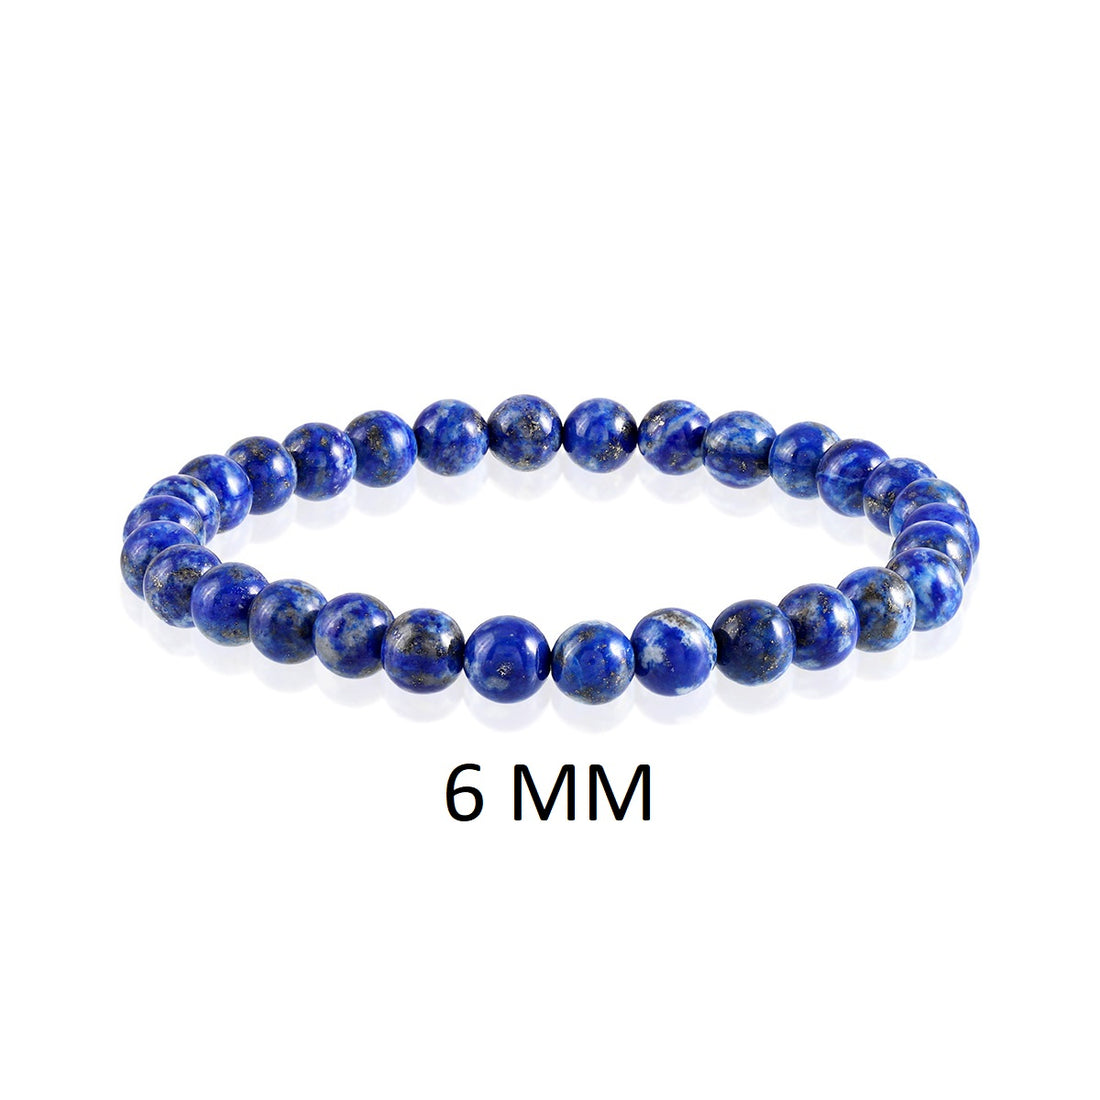 Visual representation of confidence and enhanced communication associated with the Lapis Lazuli Stretch Bracelet, promoting self-expression and understanding